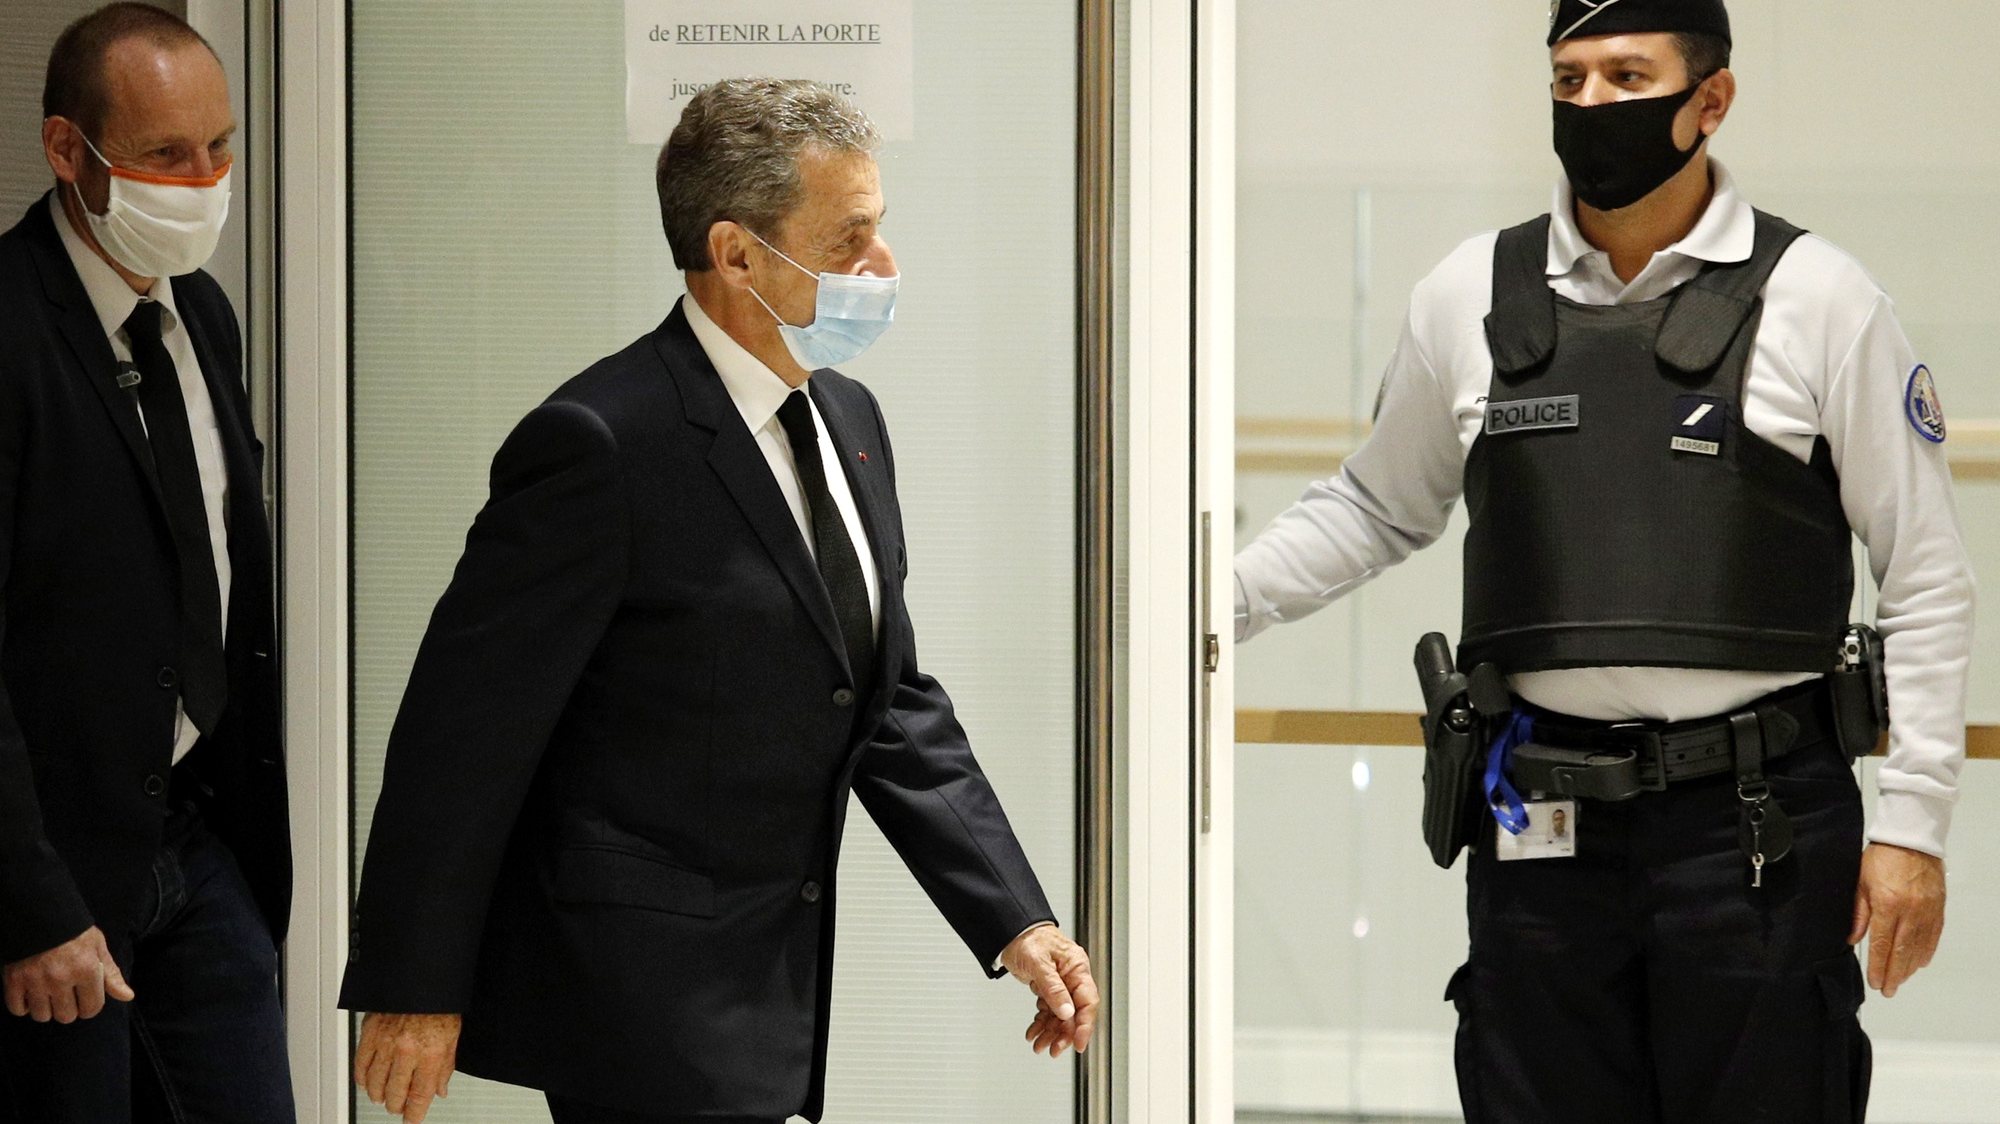 epa08843475 Former French president Nicolas Sarkozy (C) leaves the courtroom during his trial on corruption charges in the so-called &#039;wiretapping affair&#039; in Paris, France, 26 November 2020. In 2013, Nicolas Sarkozy was using a false name, Paul Bismuth, to make phone calls to call his lawyer, Thierry Herzog, about the decision that the Court of Cassation was about to take regarding the seizure of presidential diaries in a separate case. The trial is due to run from 23 November to 10 December.  EPA/YOAN VALAT *** Local Caption *** 55512057